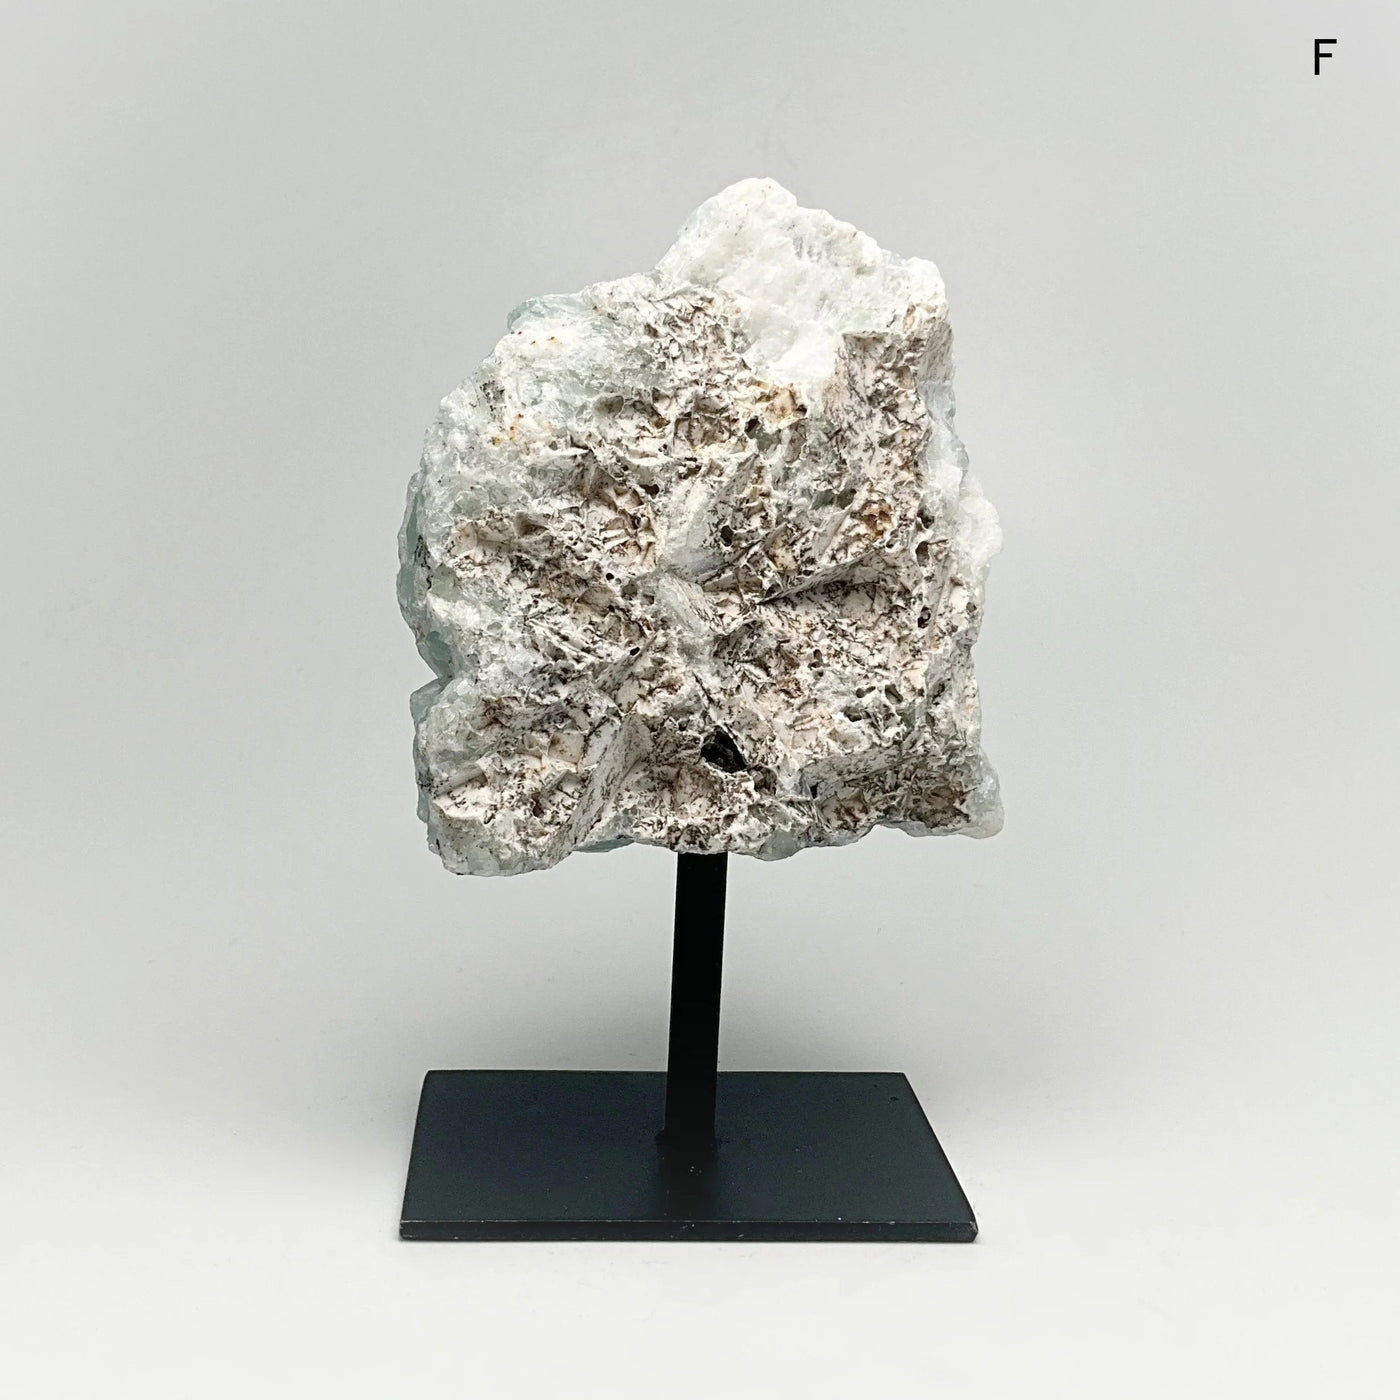 Rough Fluorite on Metal Display Stand